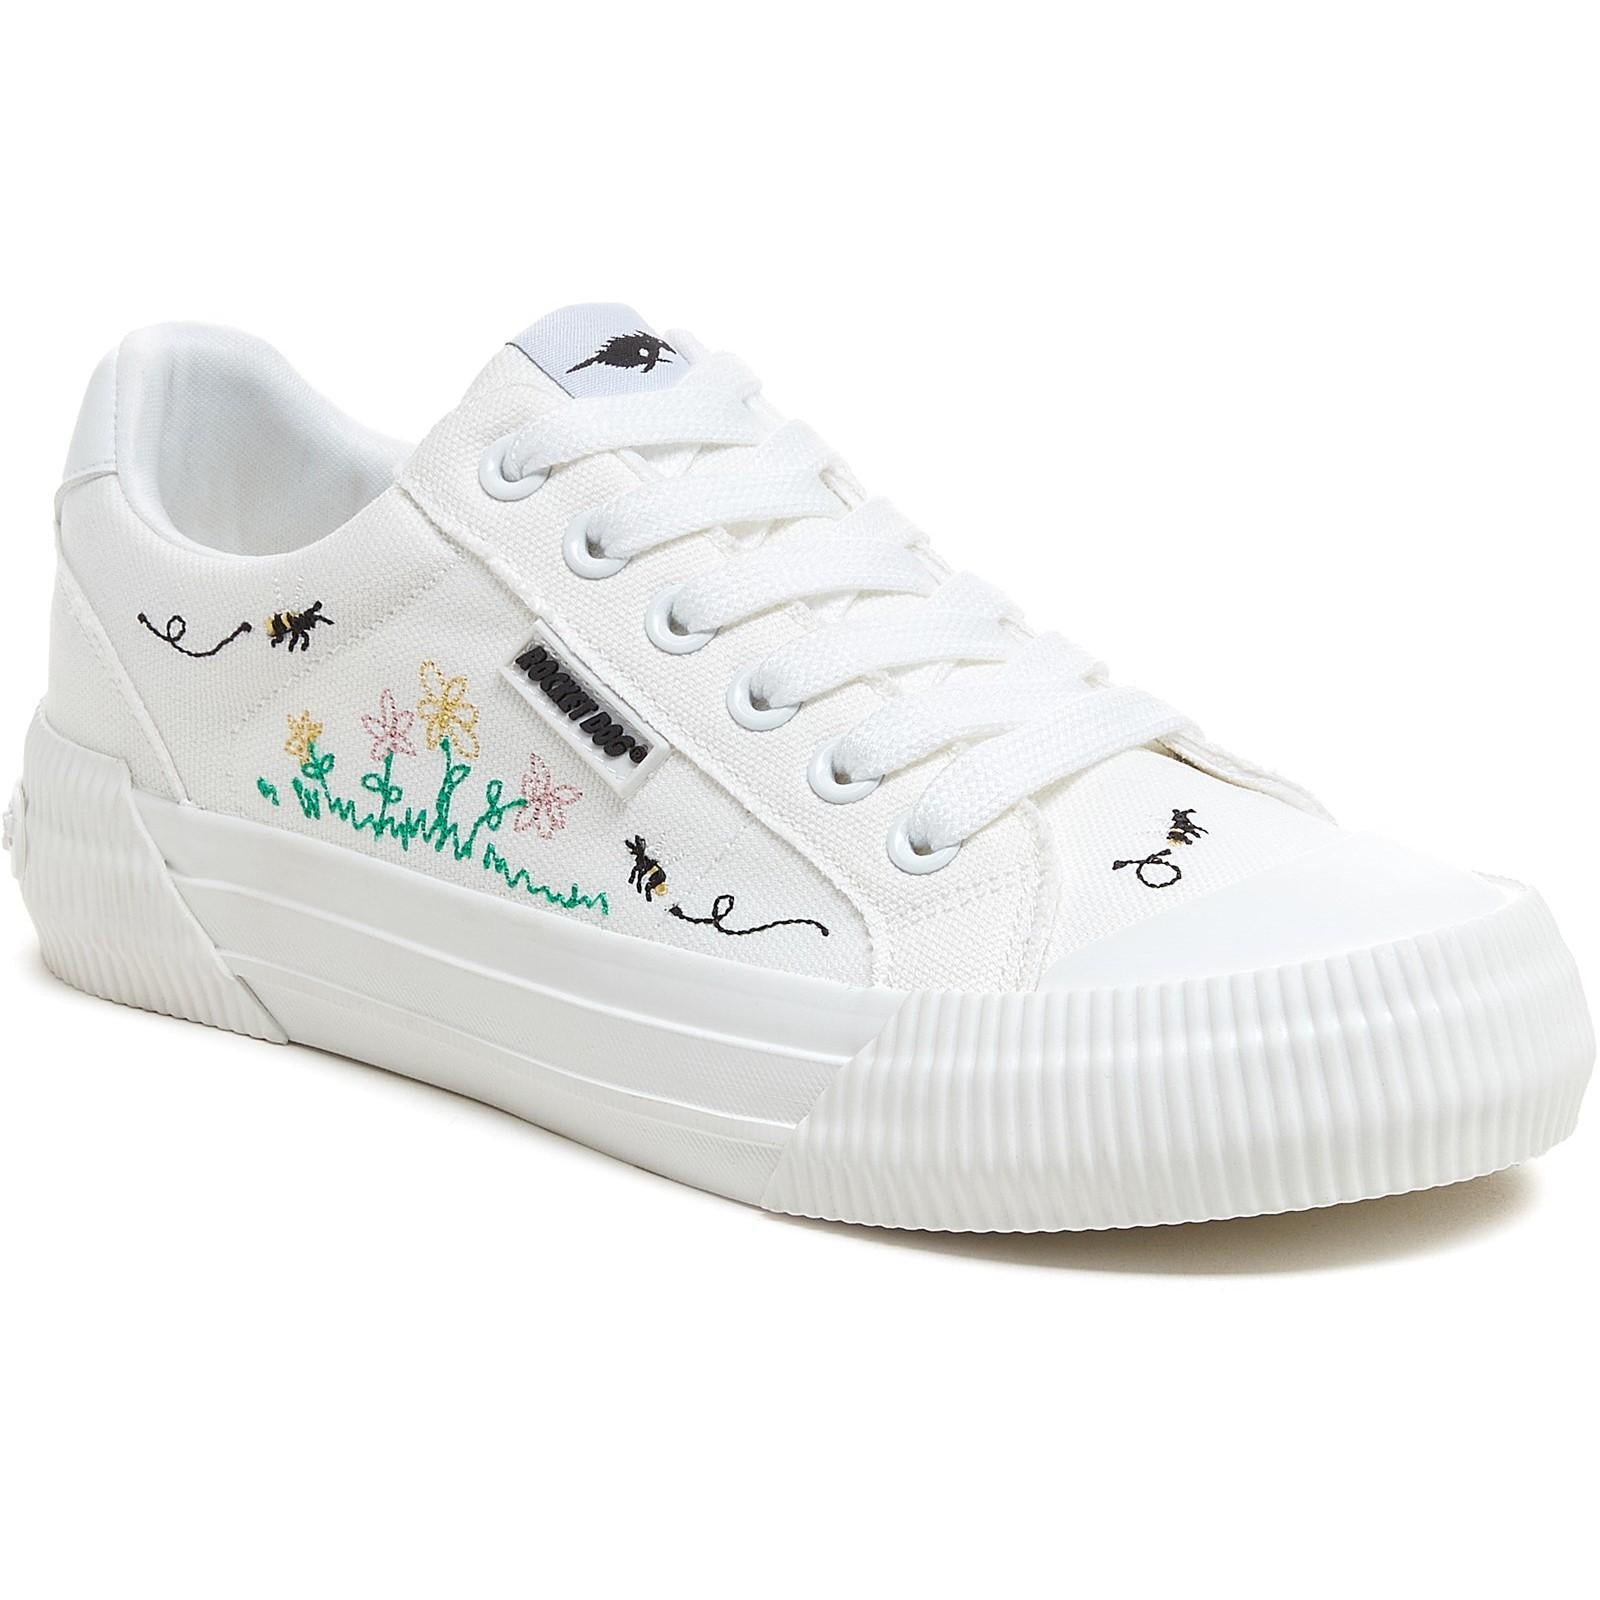 Rocket Dog Cheery Embroidery 12A Shoe